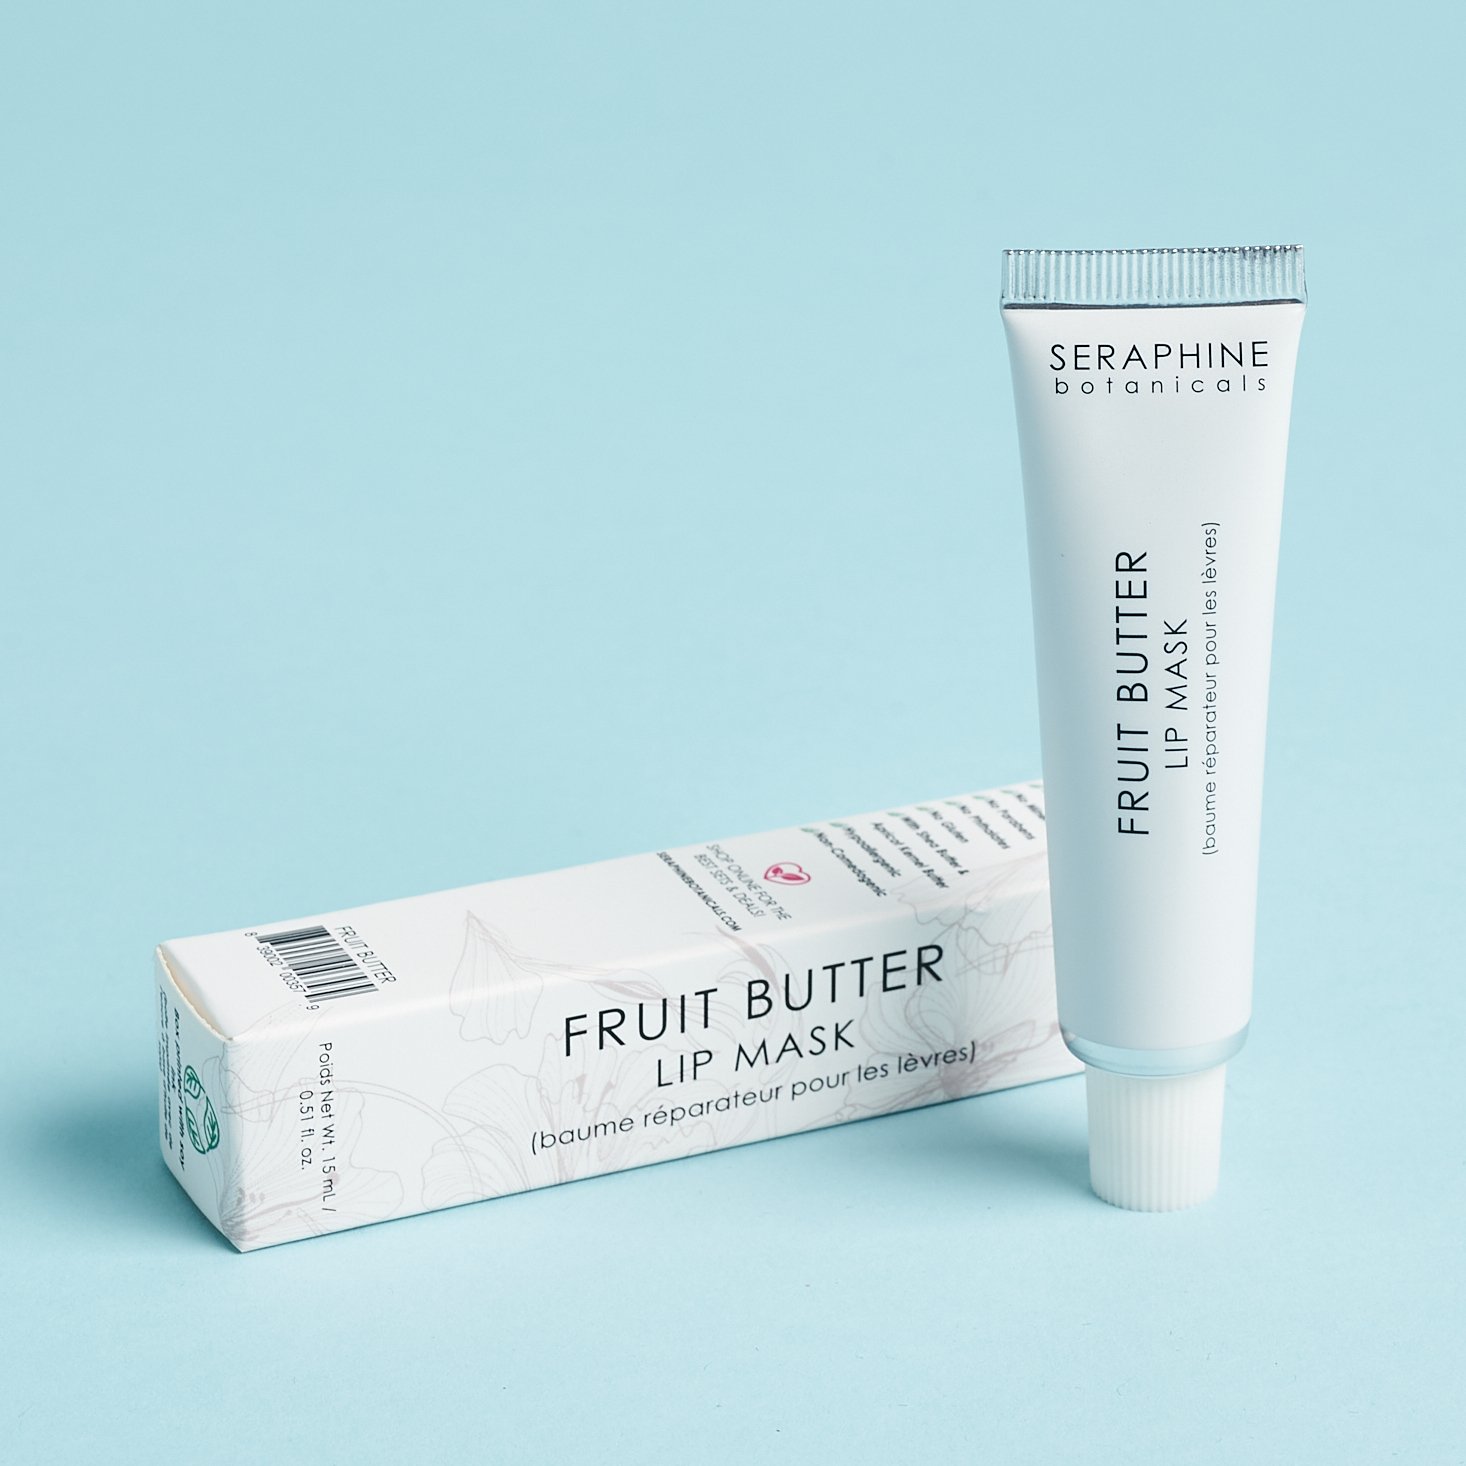 Seraphine Botanicals Fruit Butter Lip Mask Front for Nourish Beauty Box August 2020